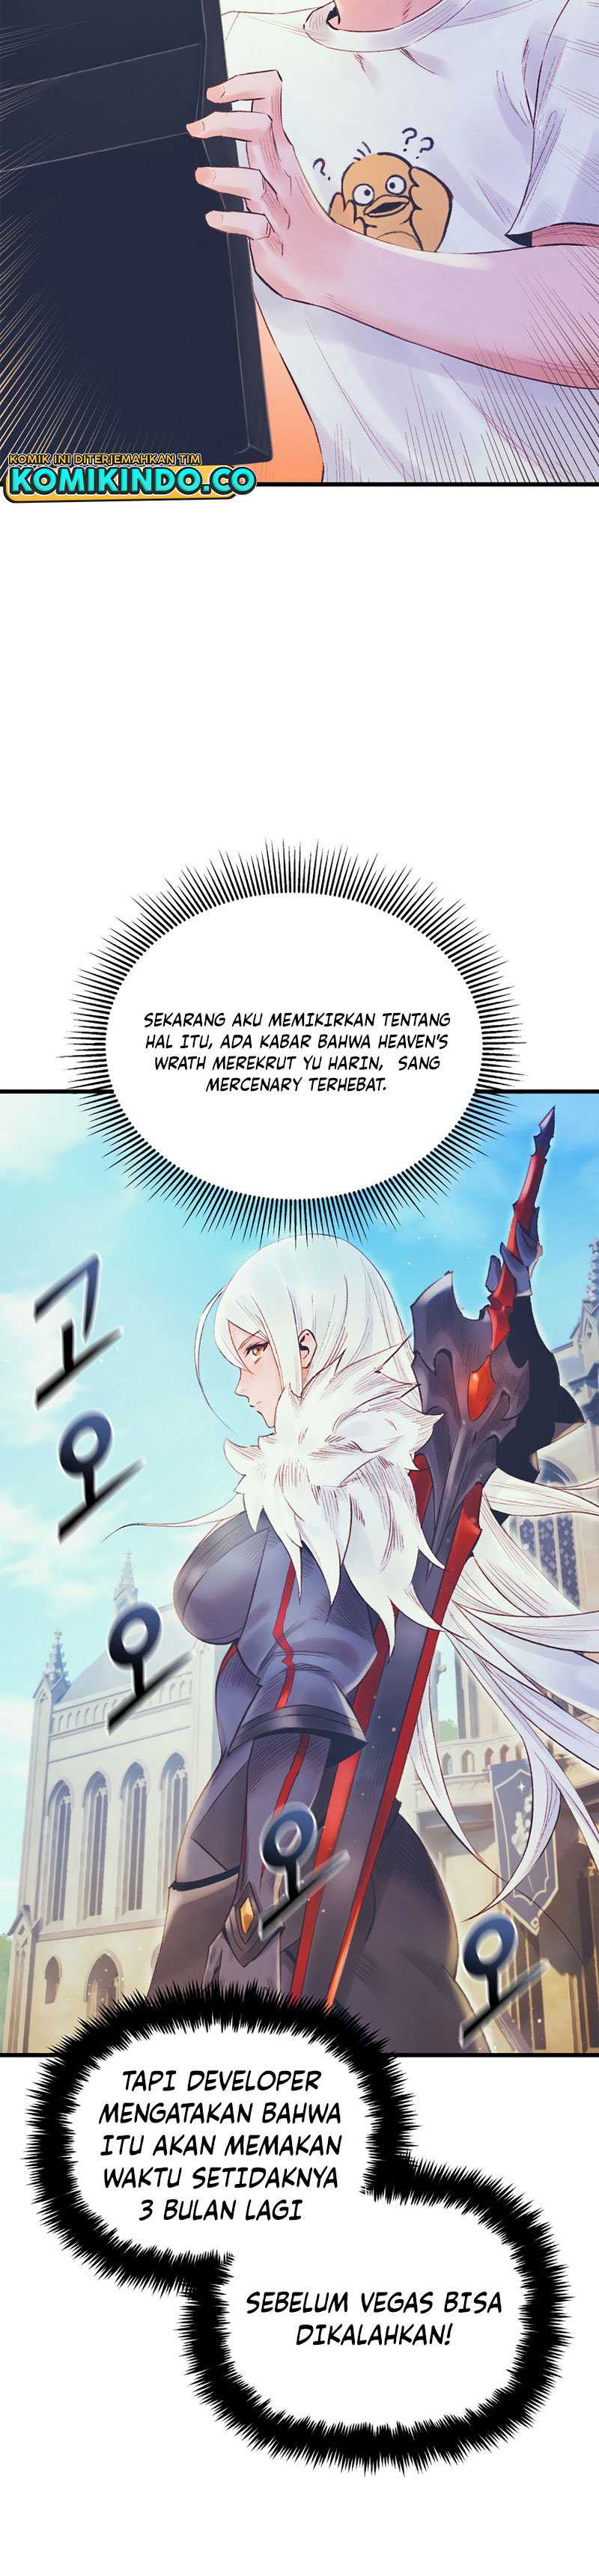 The Healing Priest Of The Sun Chapter 25